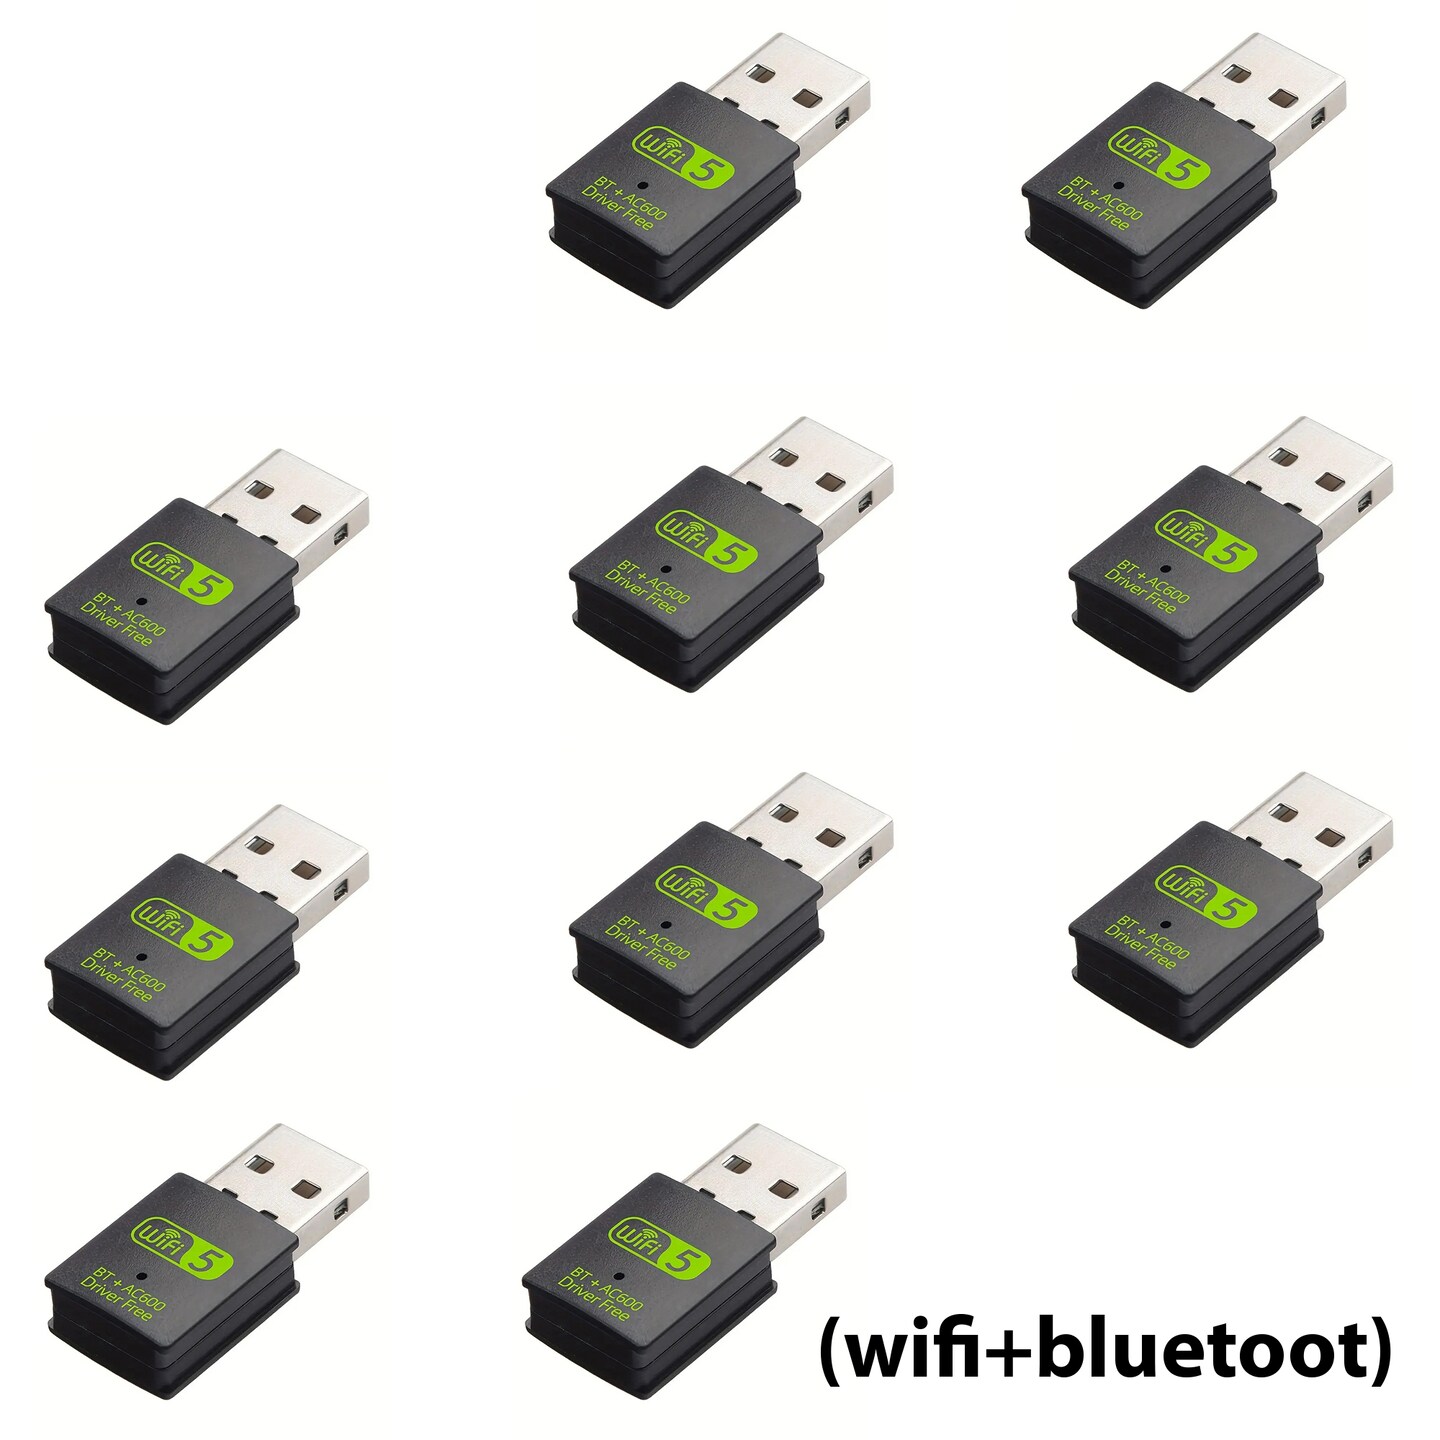 USB Wifi Adapter, Bluetooth Enabled (600Mbps)- Ultra-Fast Data